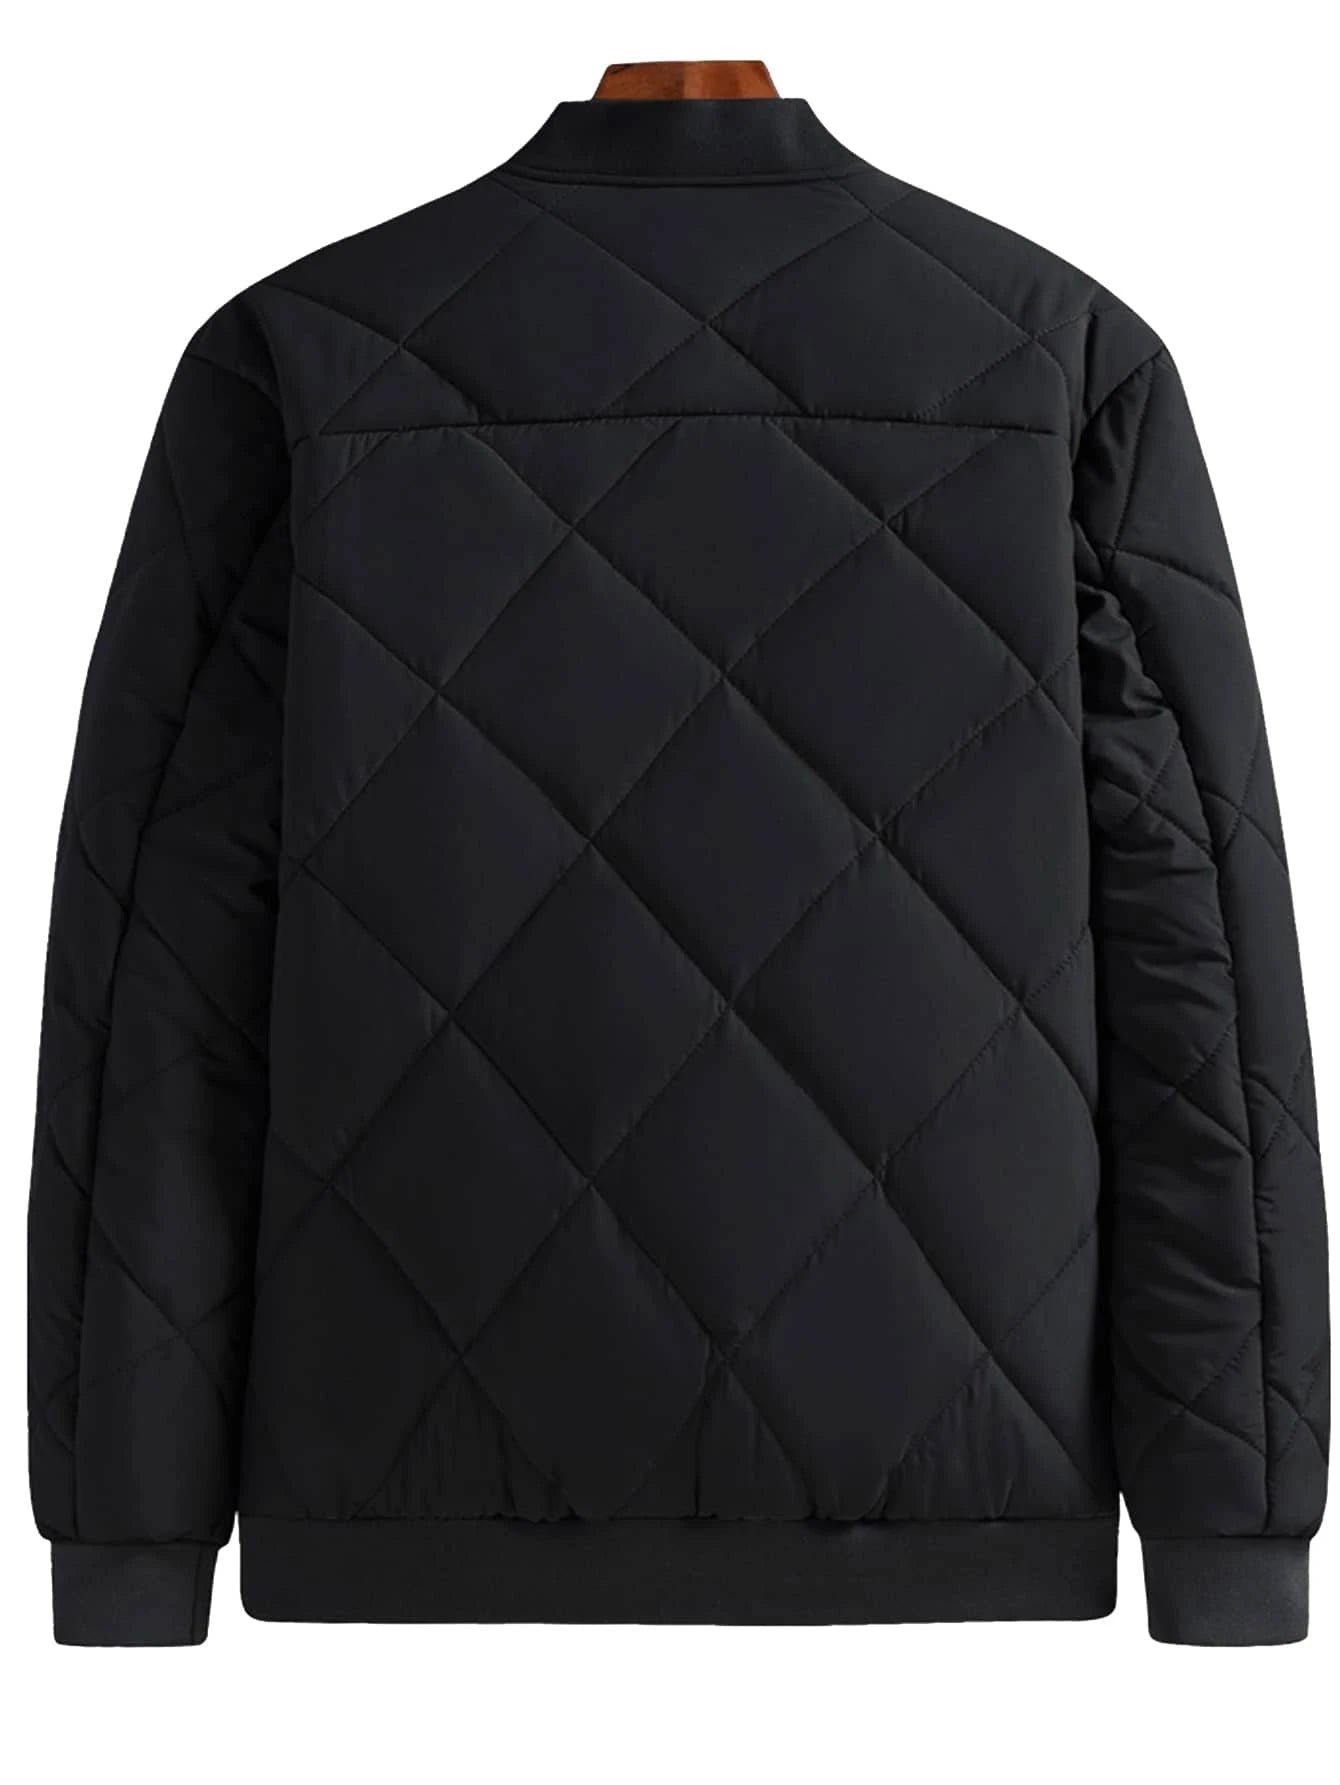 Men's Quilted Bomber Jacket